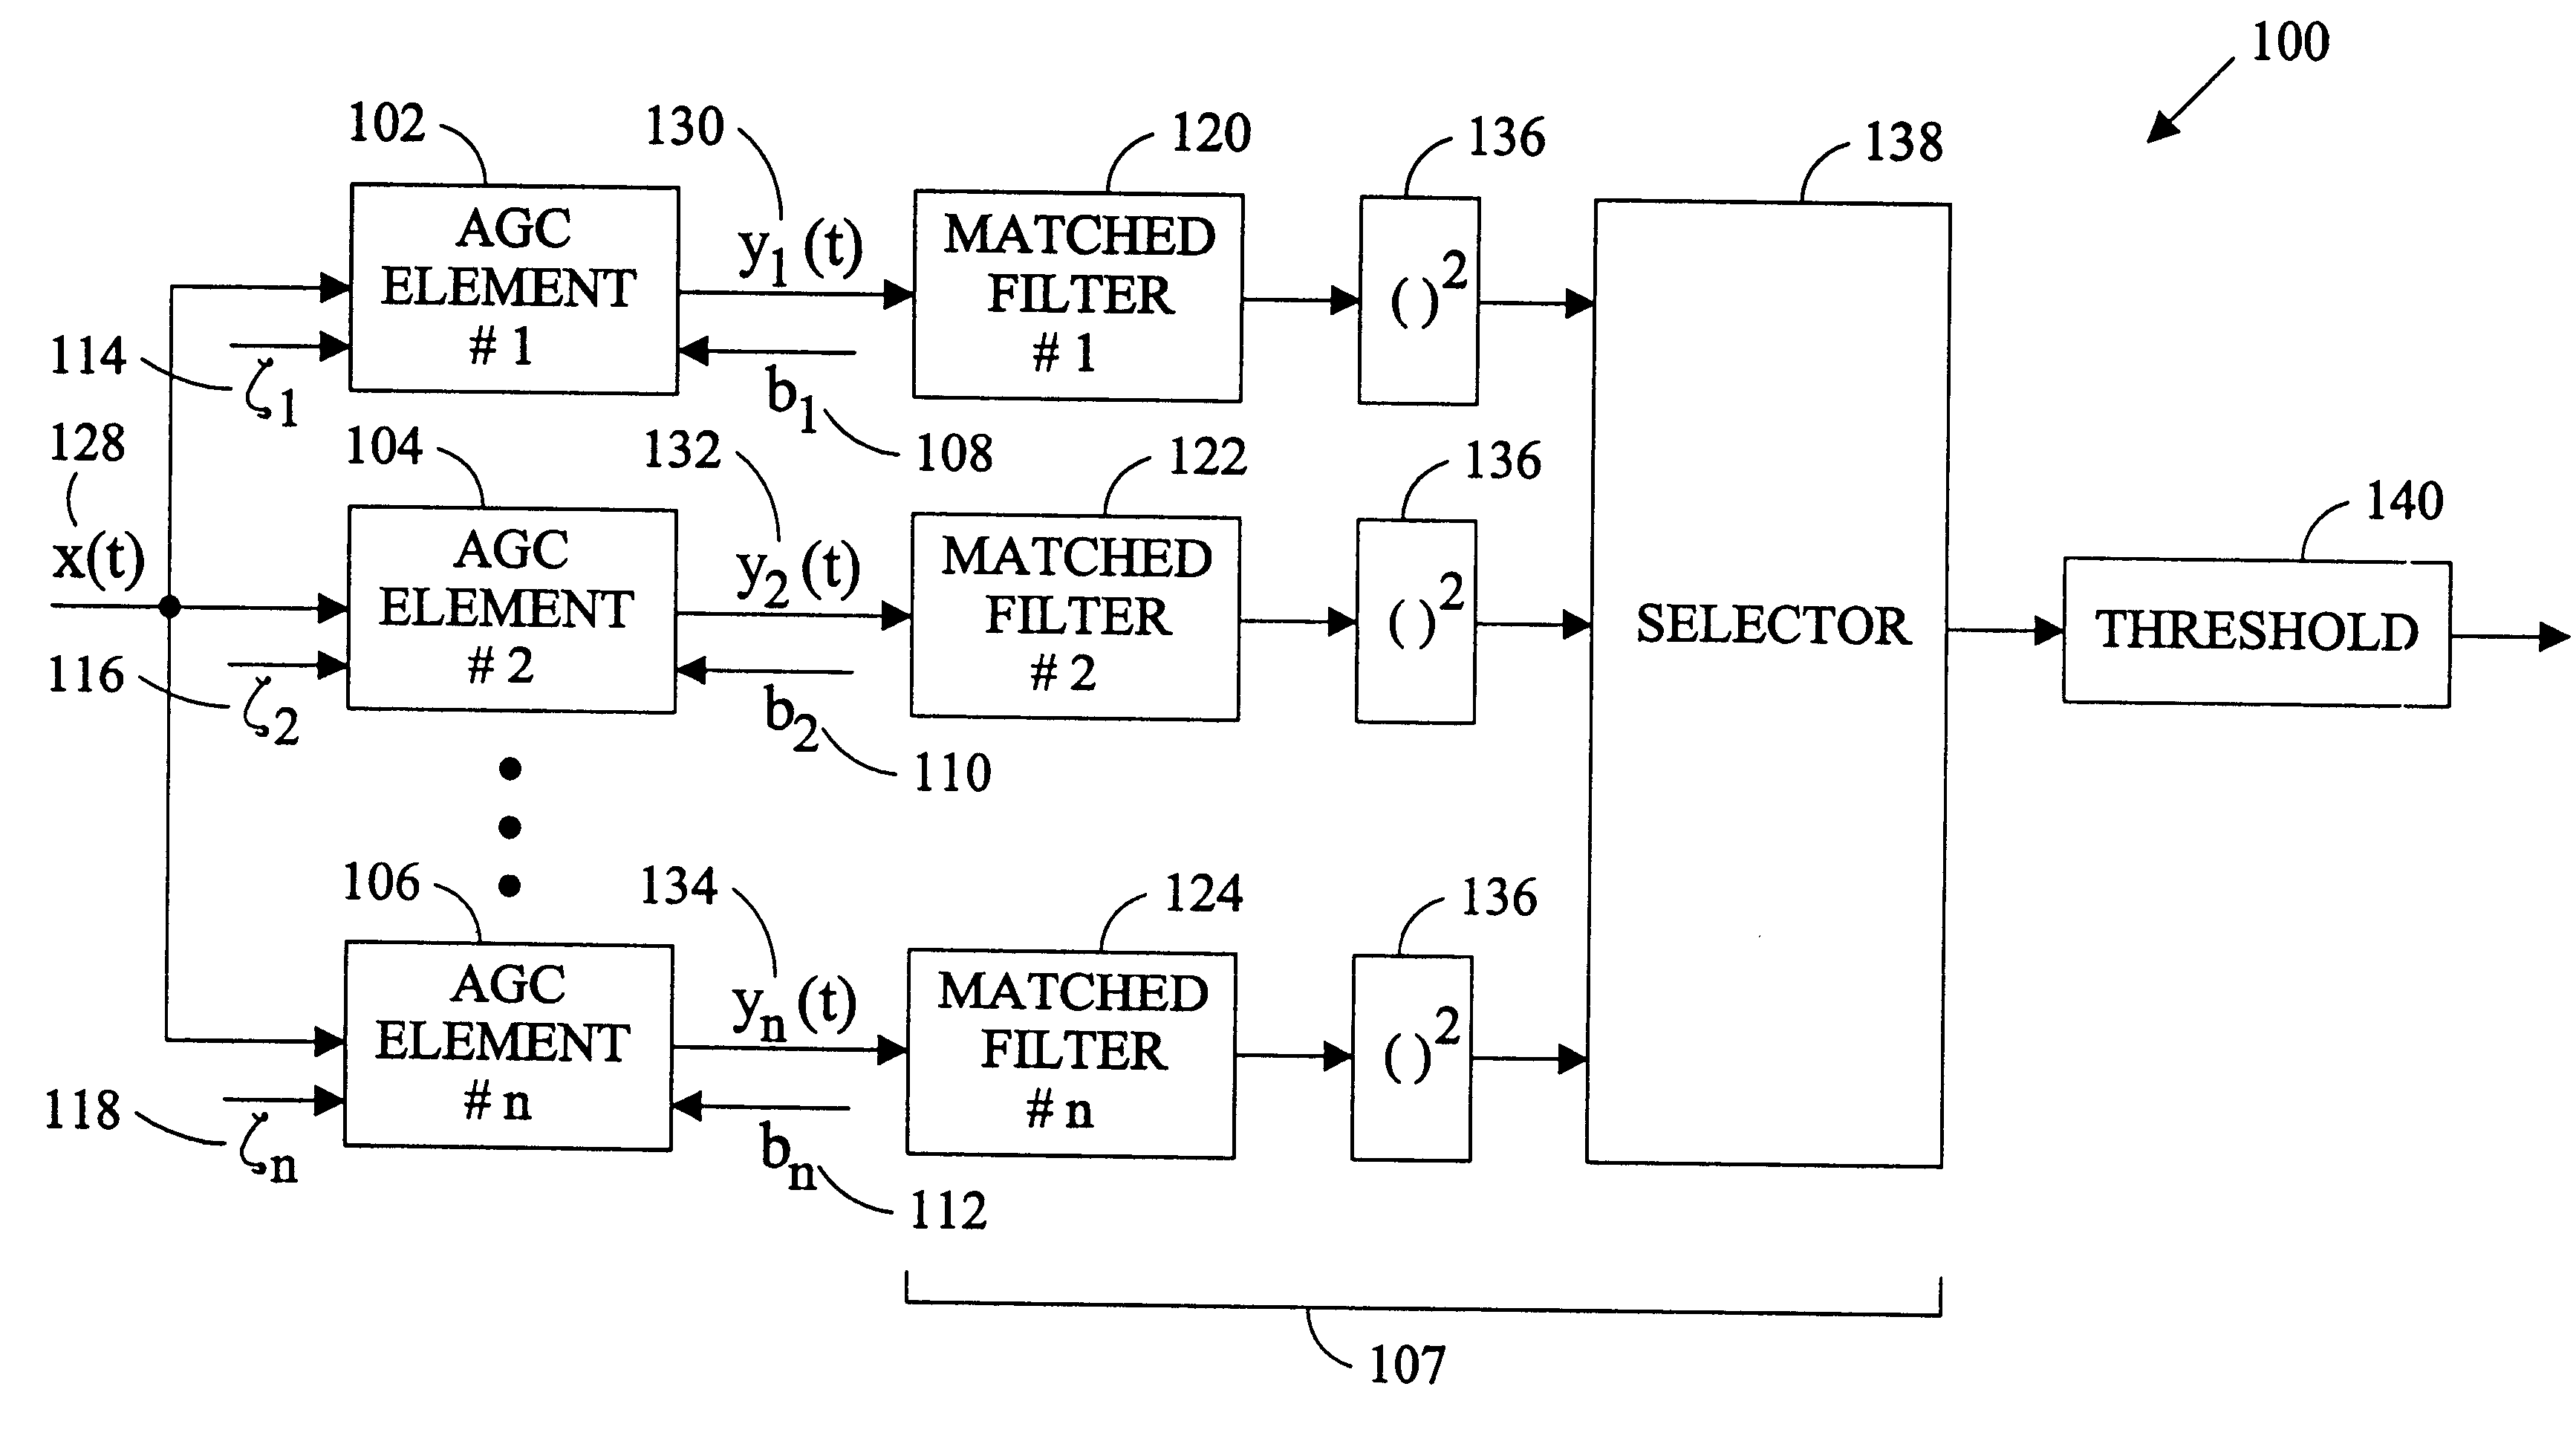 Rapid settling automatic gain control with minimal signal distortion